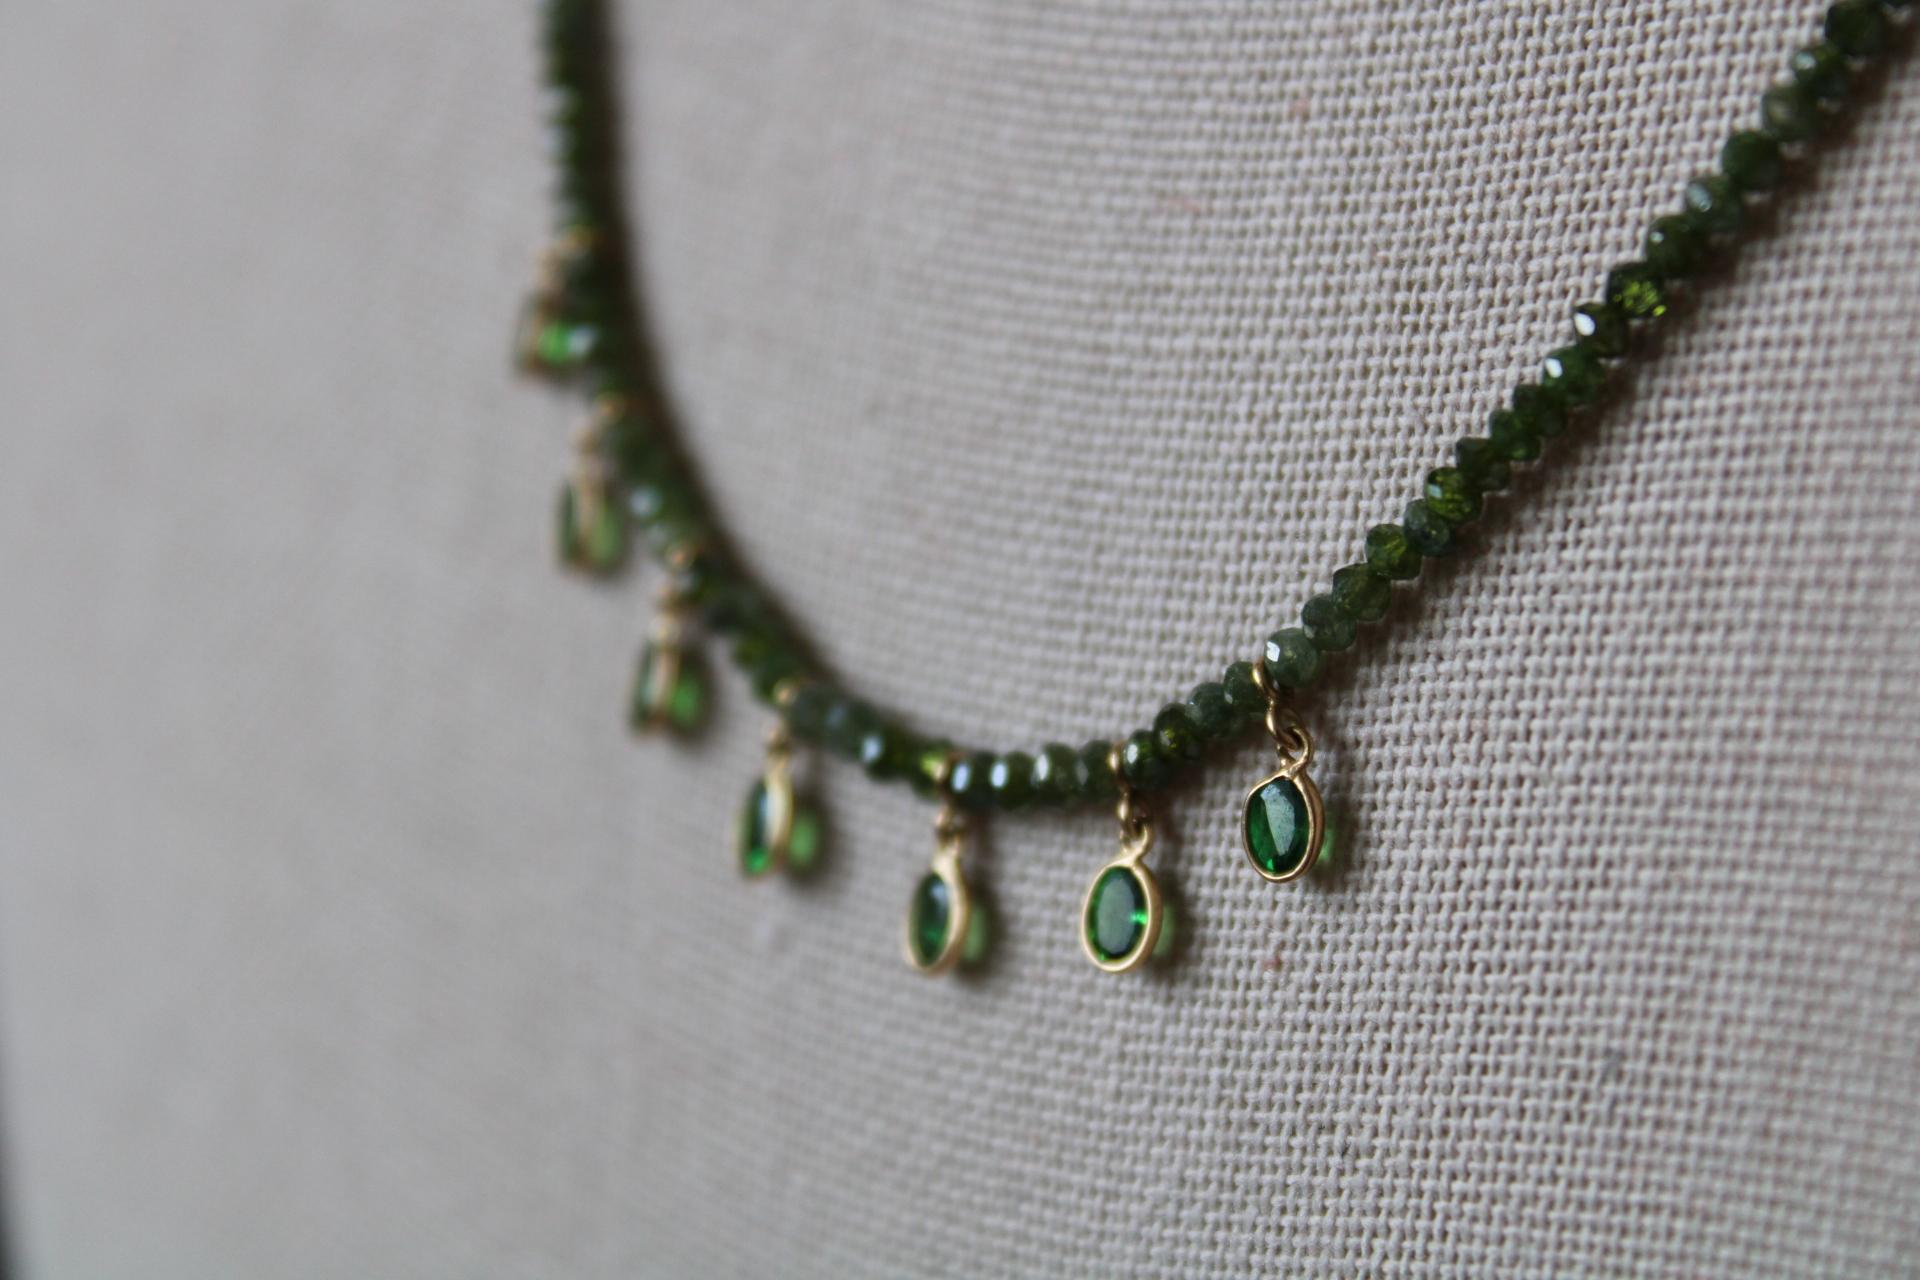 17.22 Carat Diamond Bead Chain in 18K Gold with Tsavorite Pears For Sale 1